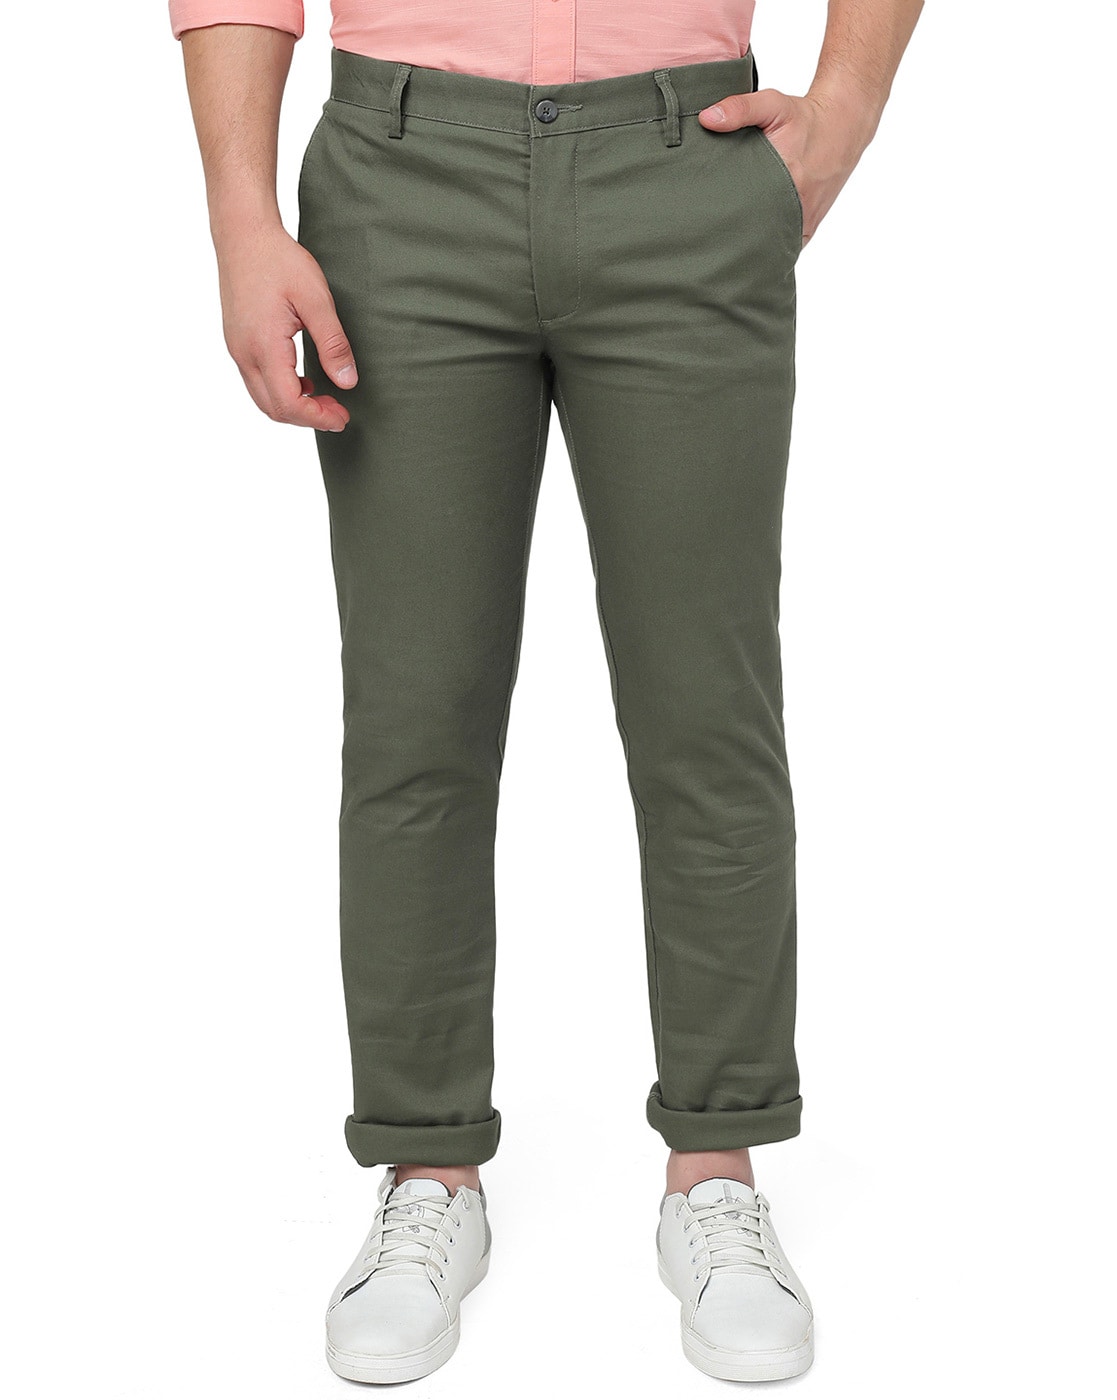 Greenfibre Trousers  Buy Greenfibre Trousers online in India